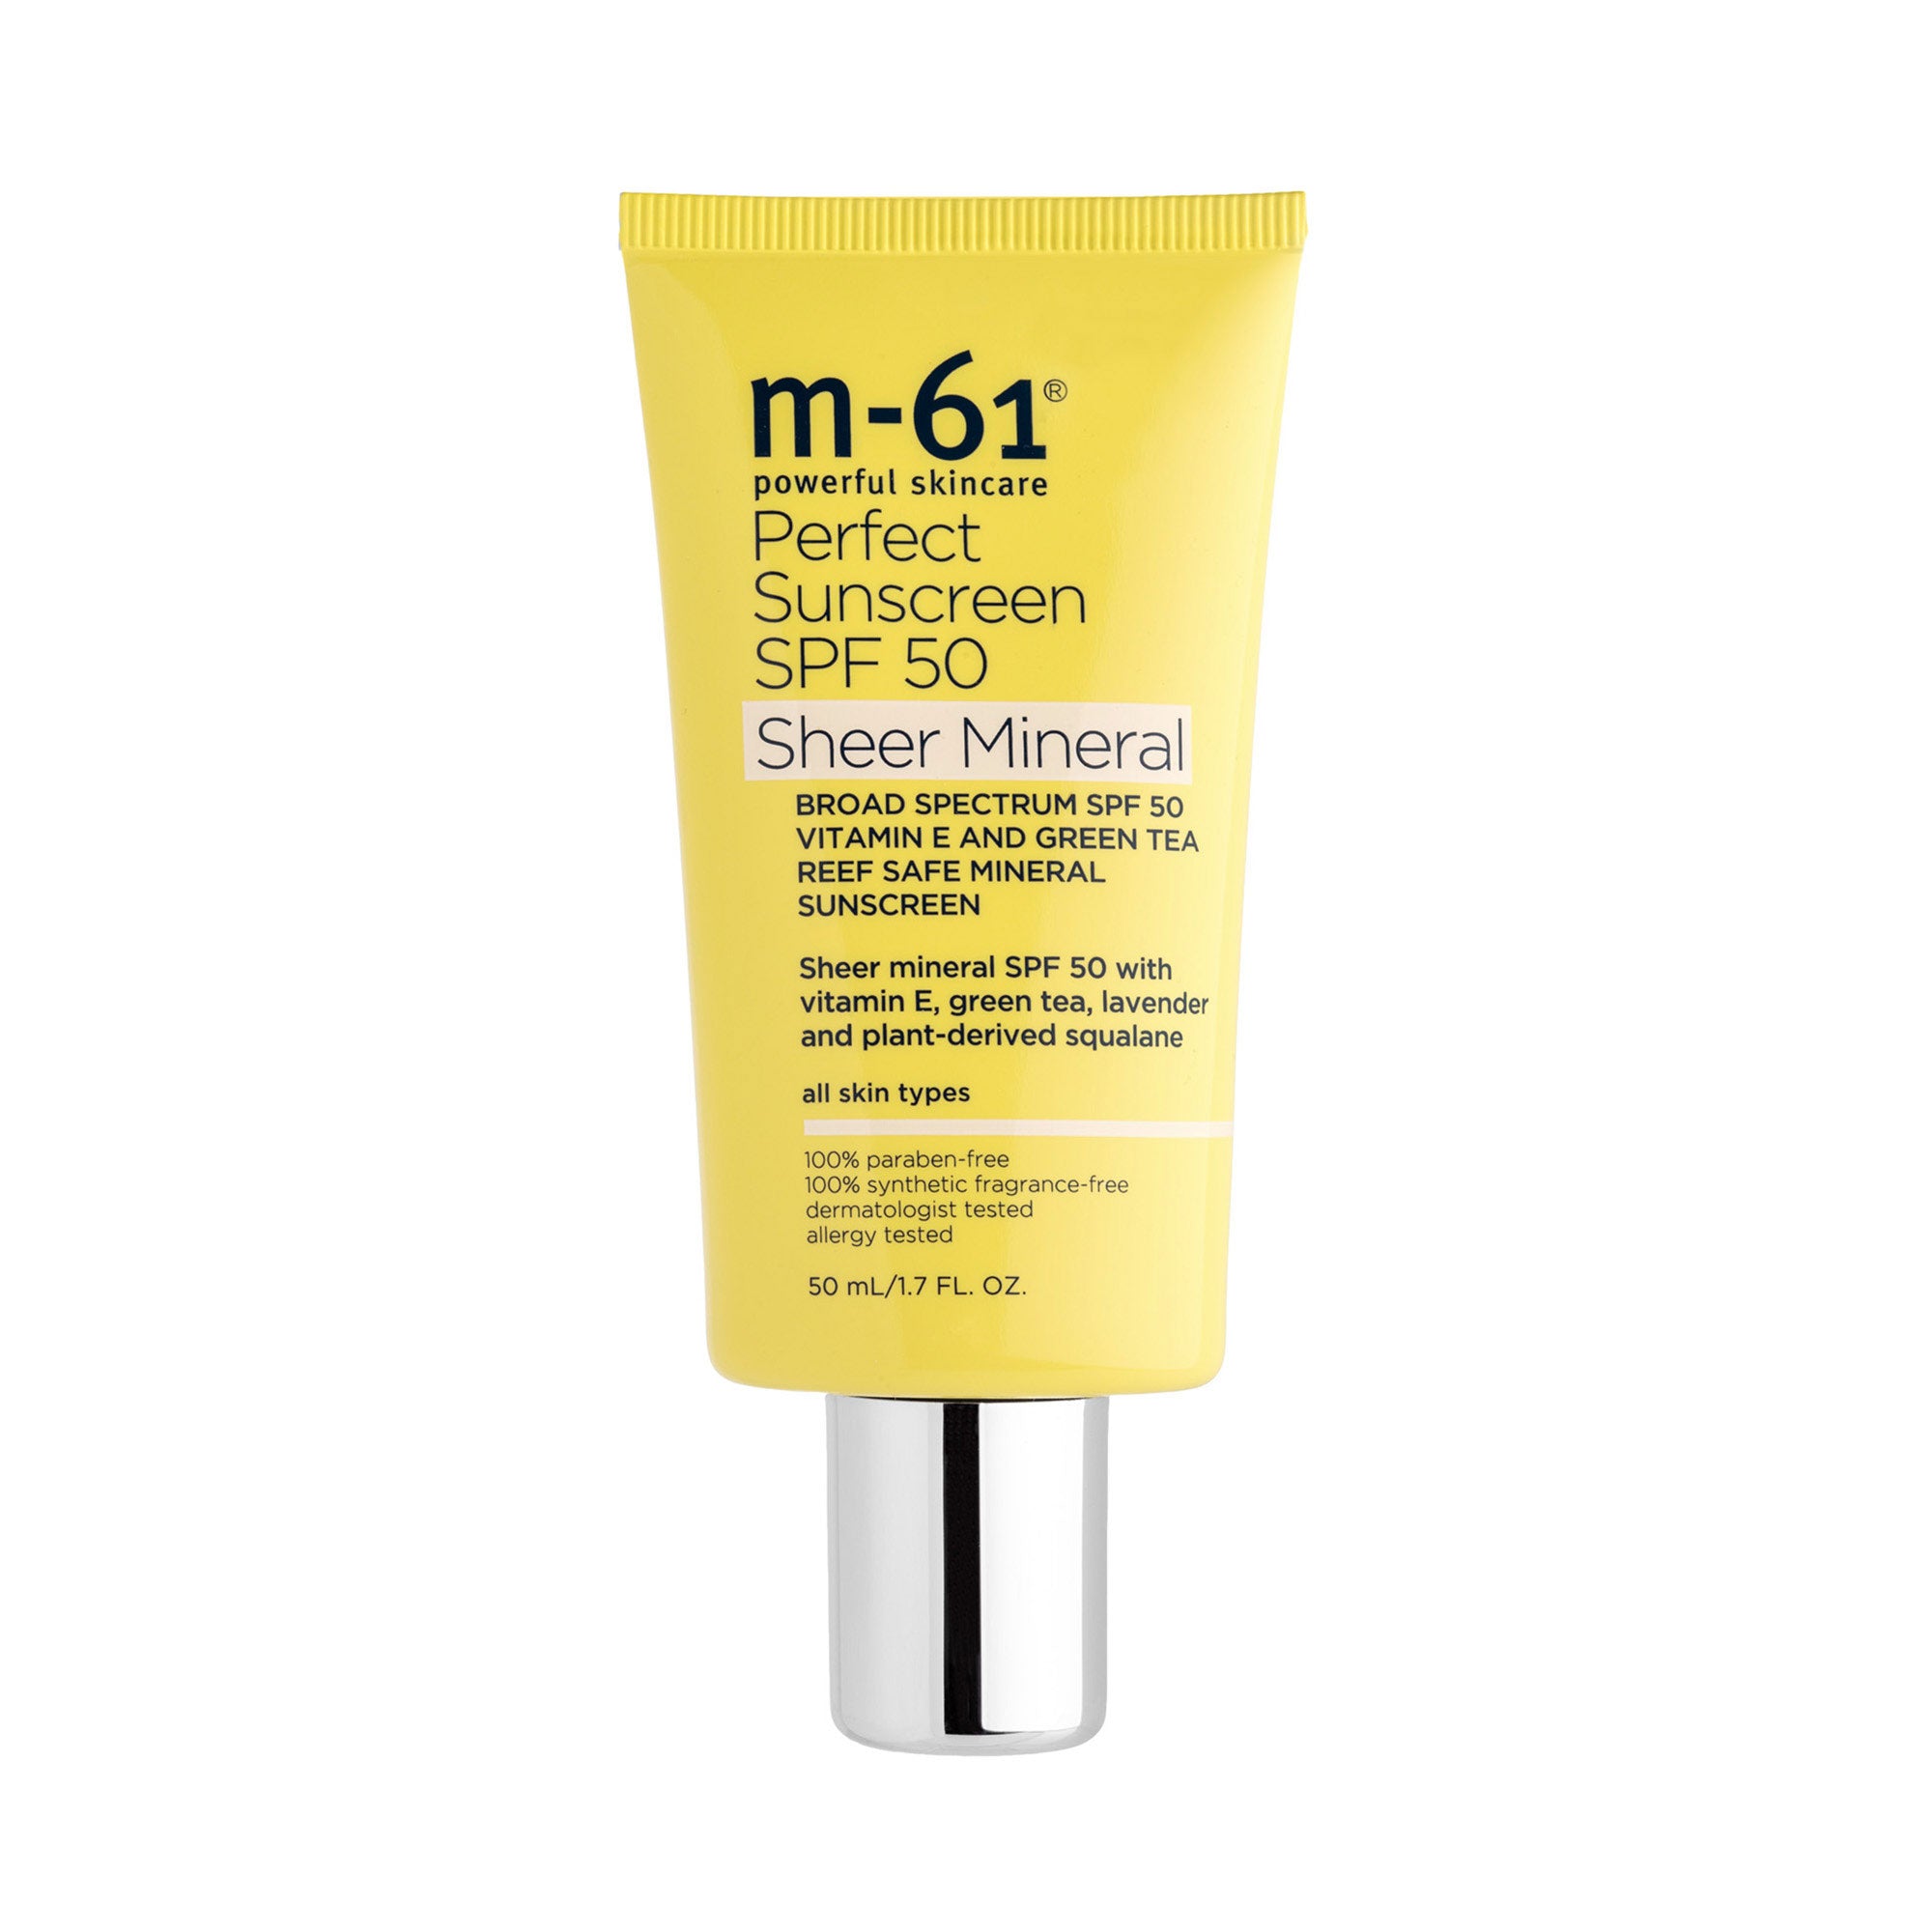 Perfect Sheer Mineral Sunscreen SPF 50 – m-61 powerful skincare